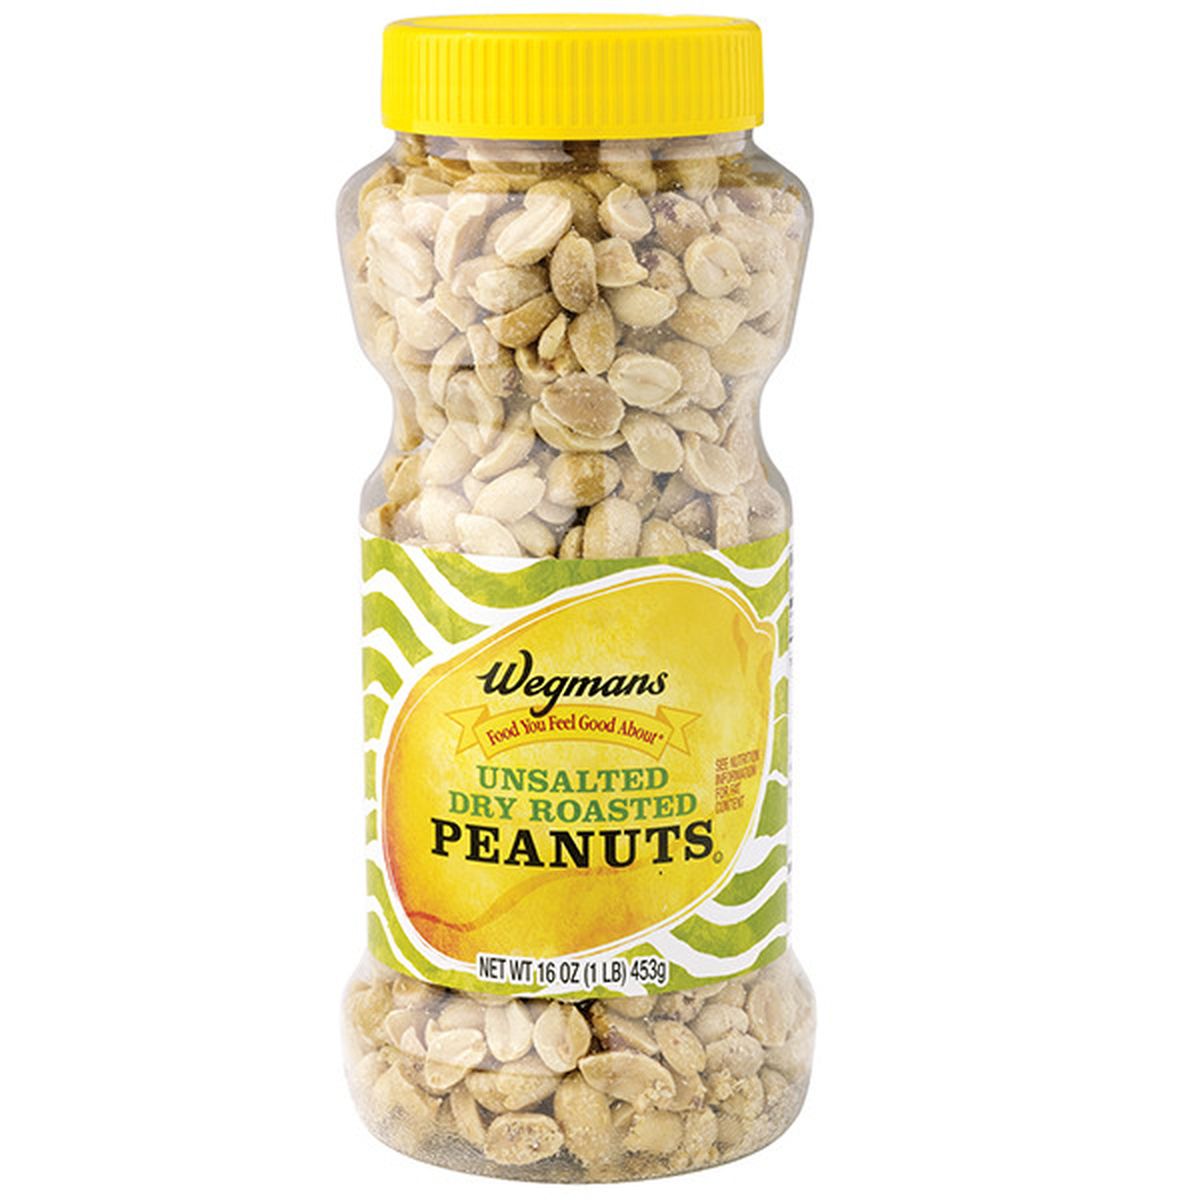 Calories in Wegmans Unsalted Dry Roasted Peanuts